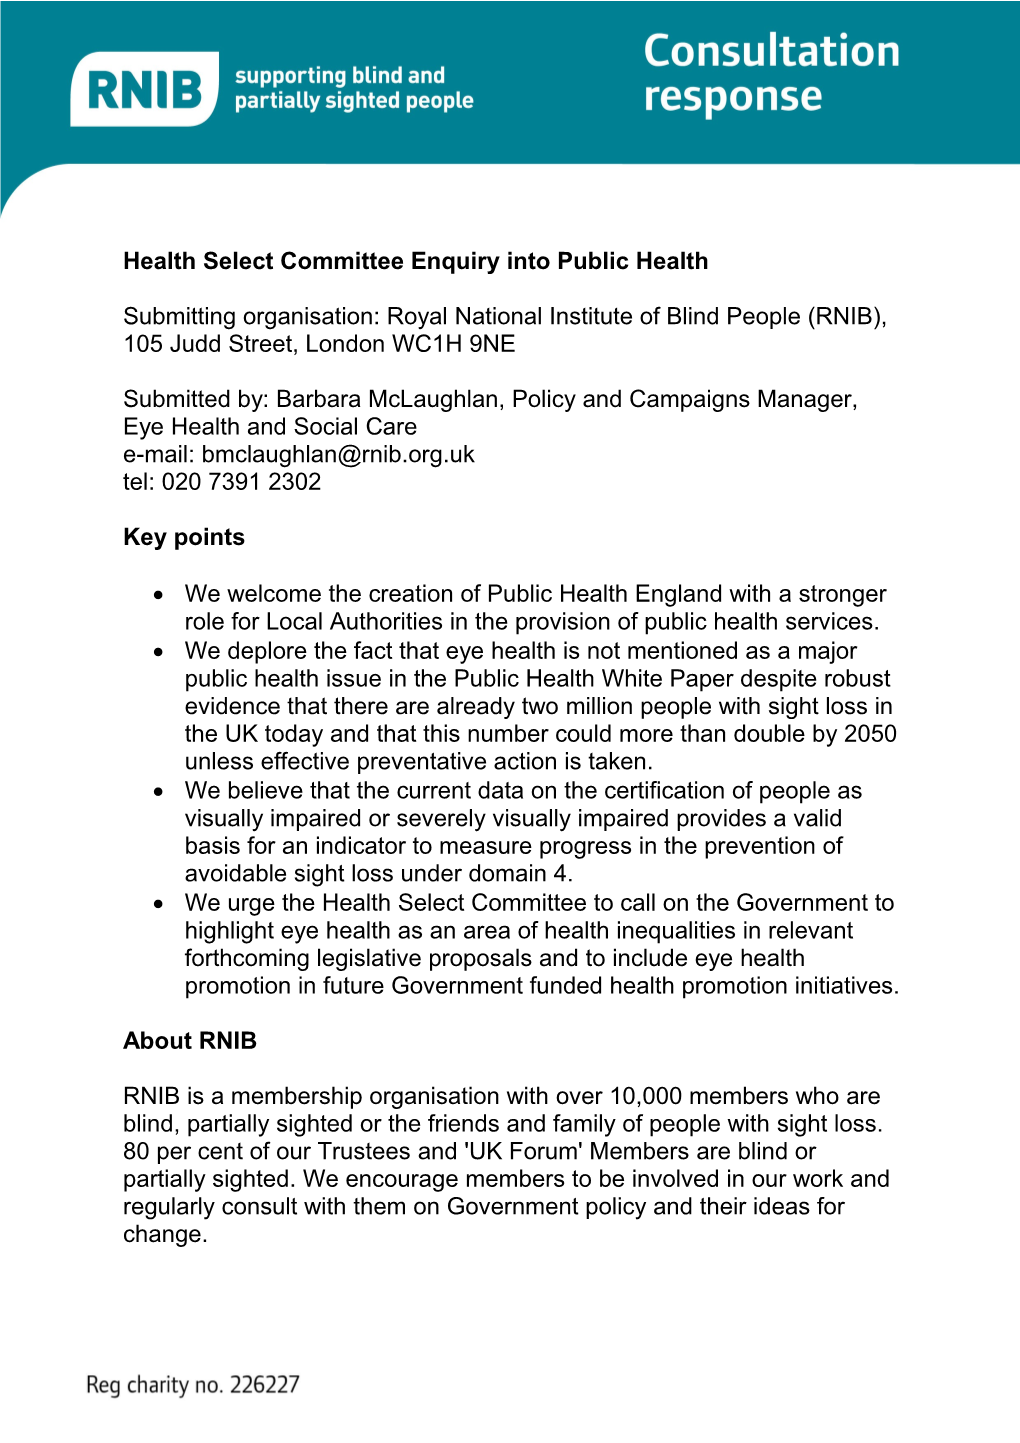 Health Select Committee Public Health